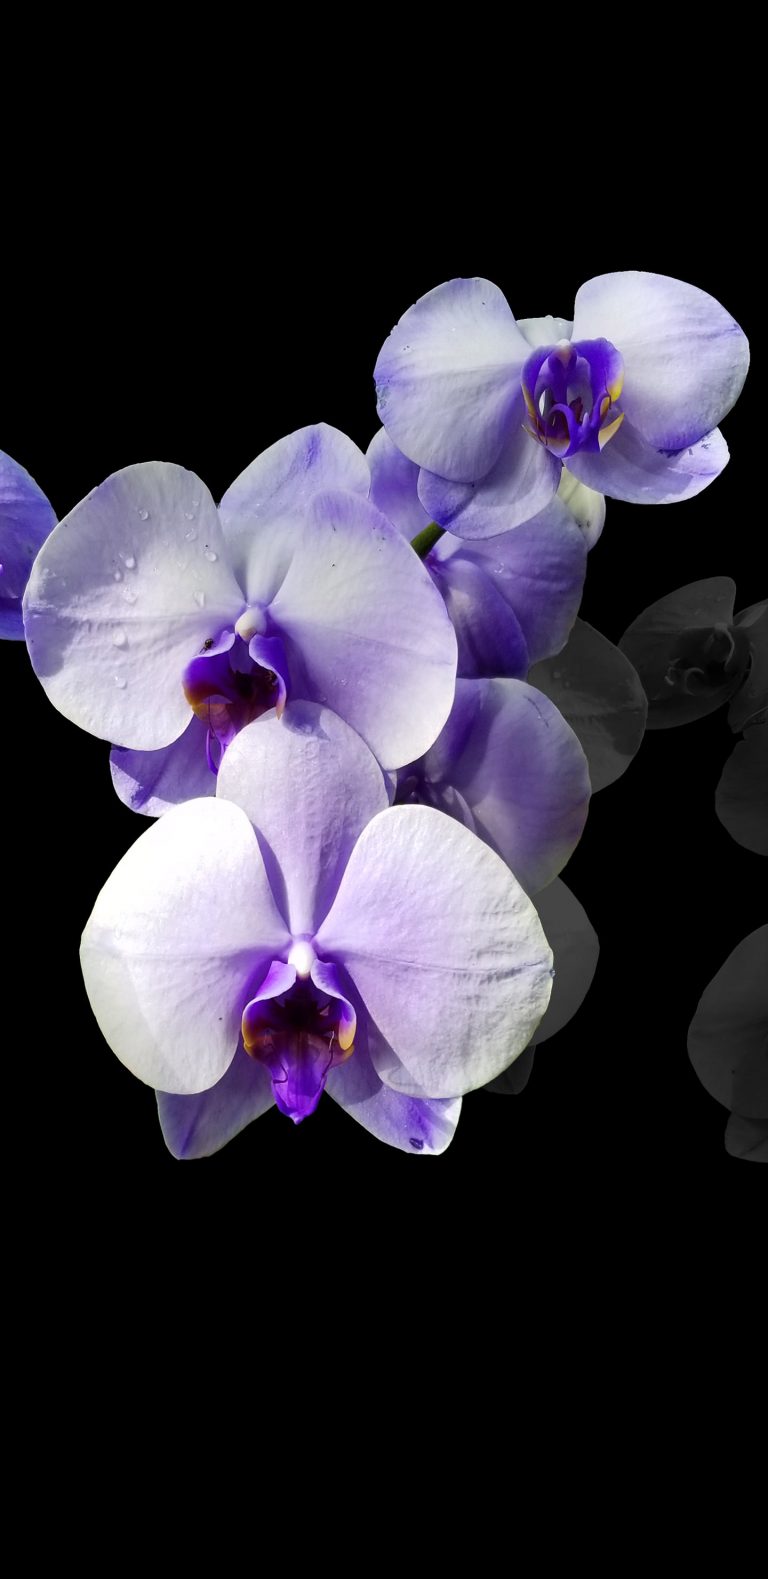 OLED-iphone-x-wallpaper-orchids-768×1579